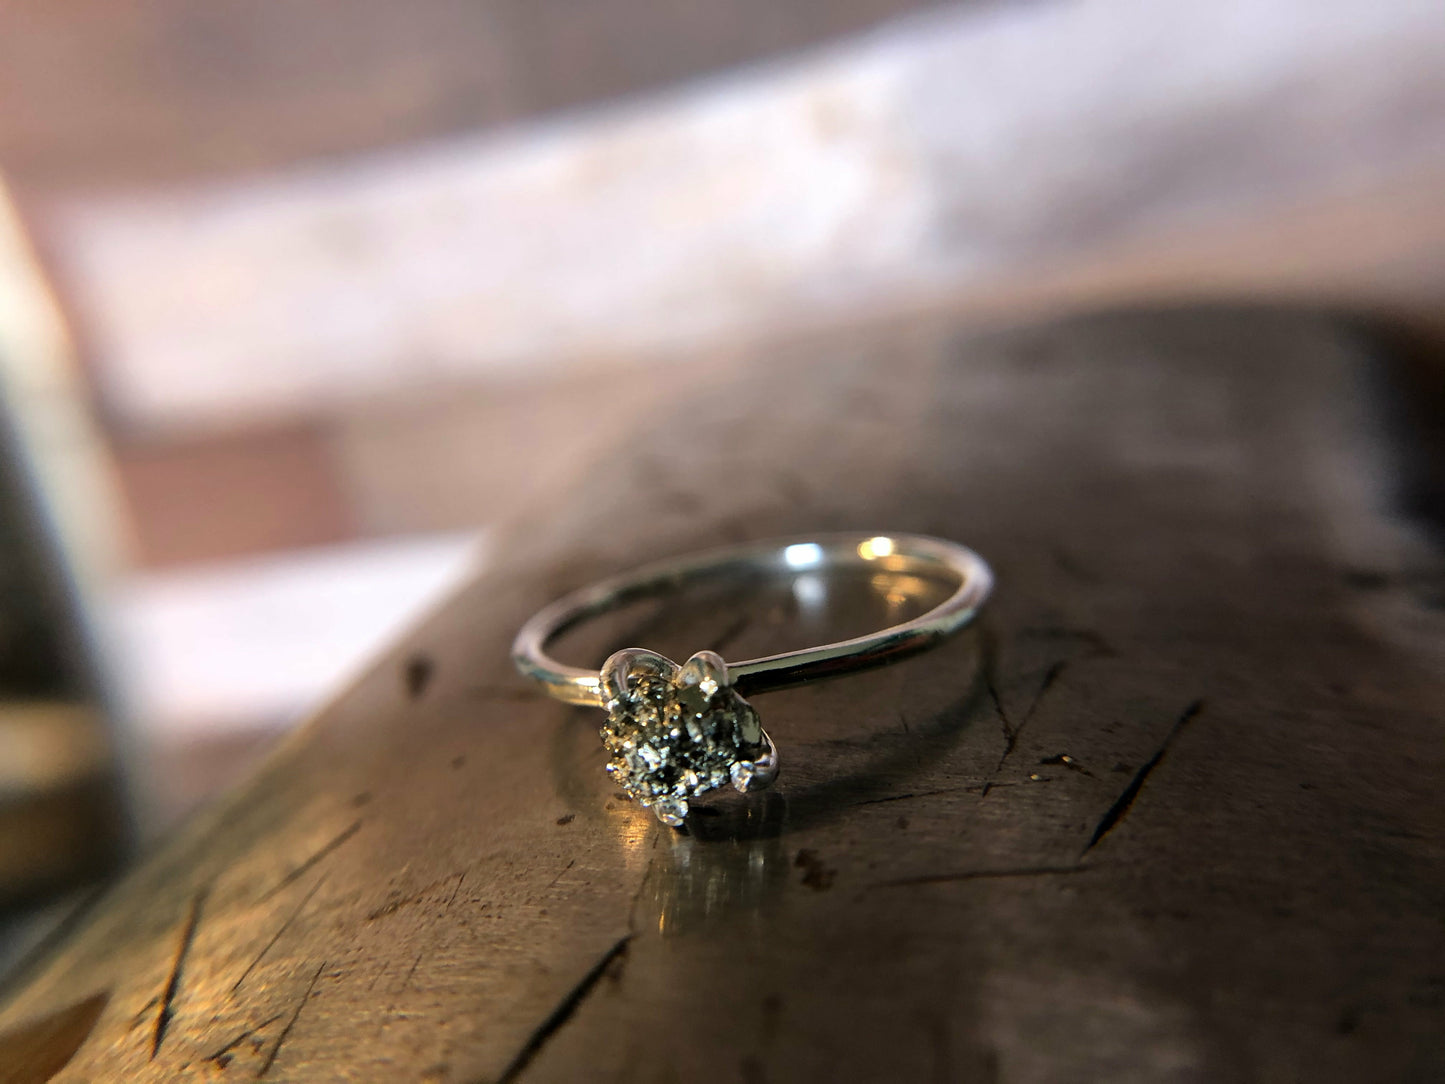 Small single band ring with raw pyrite prong set